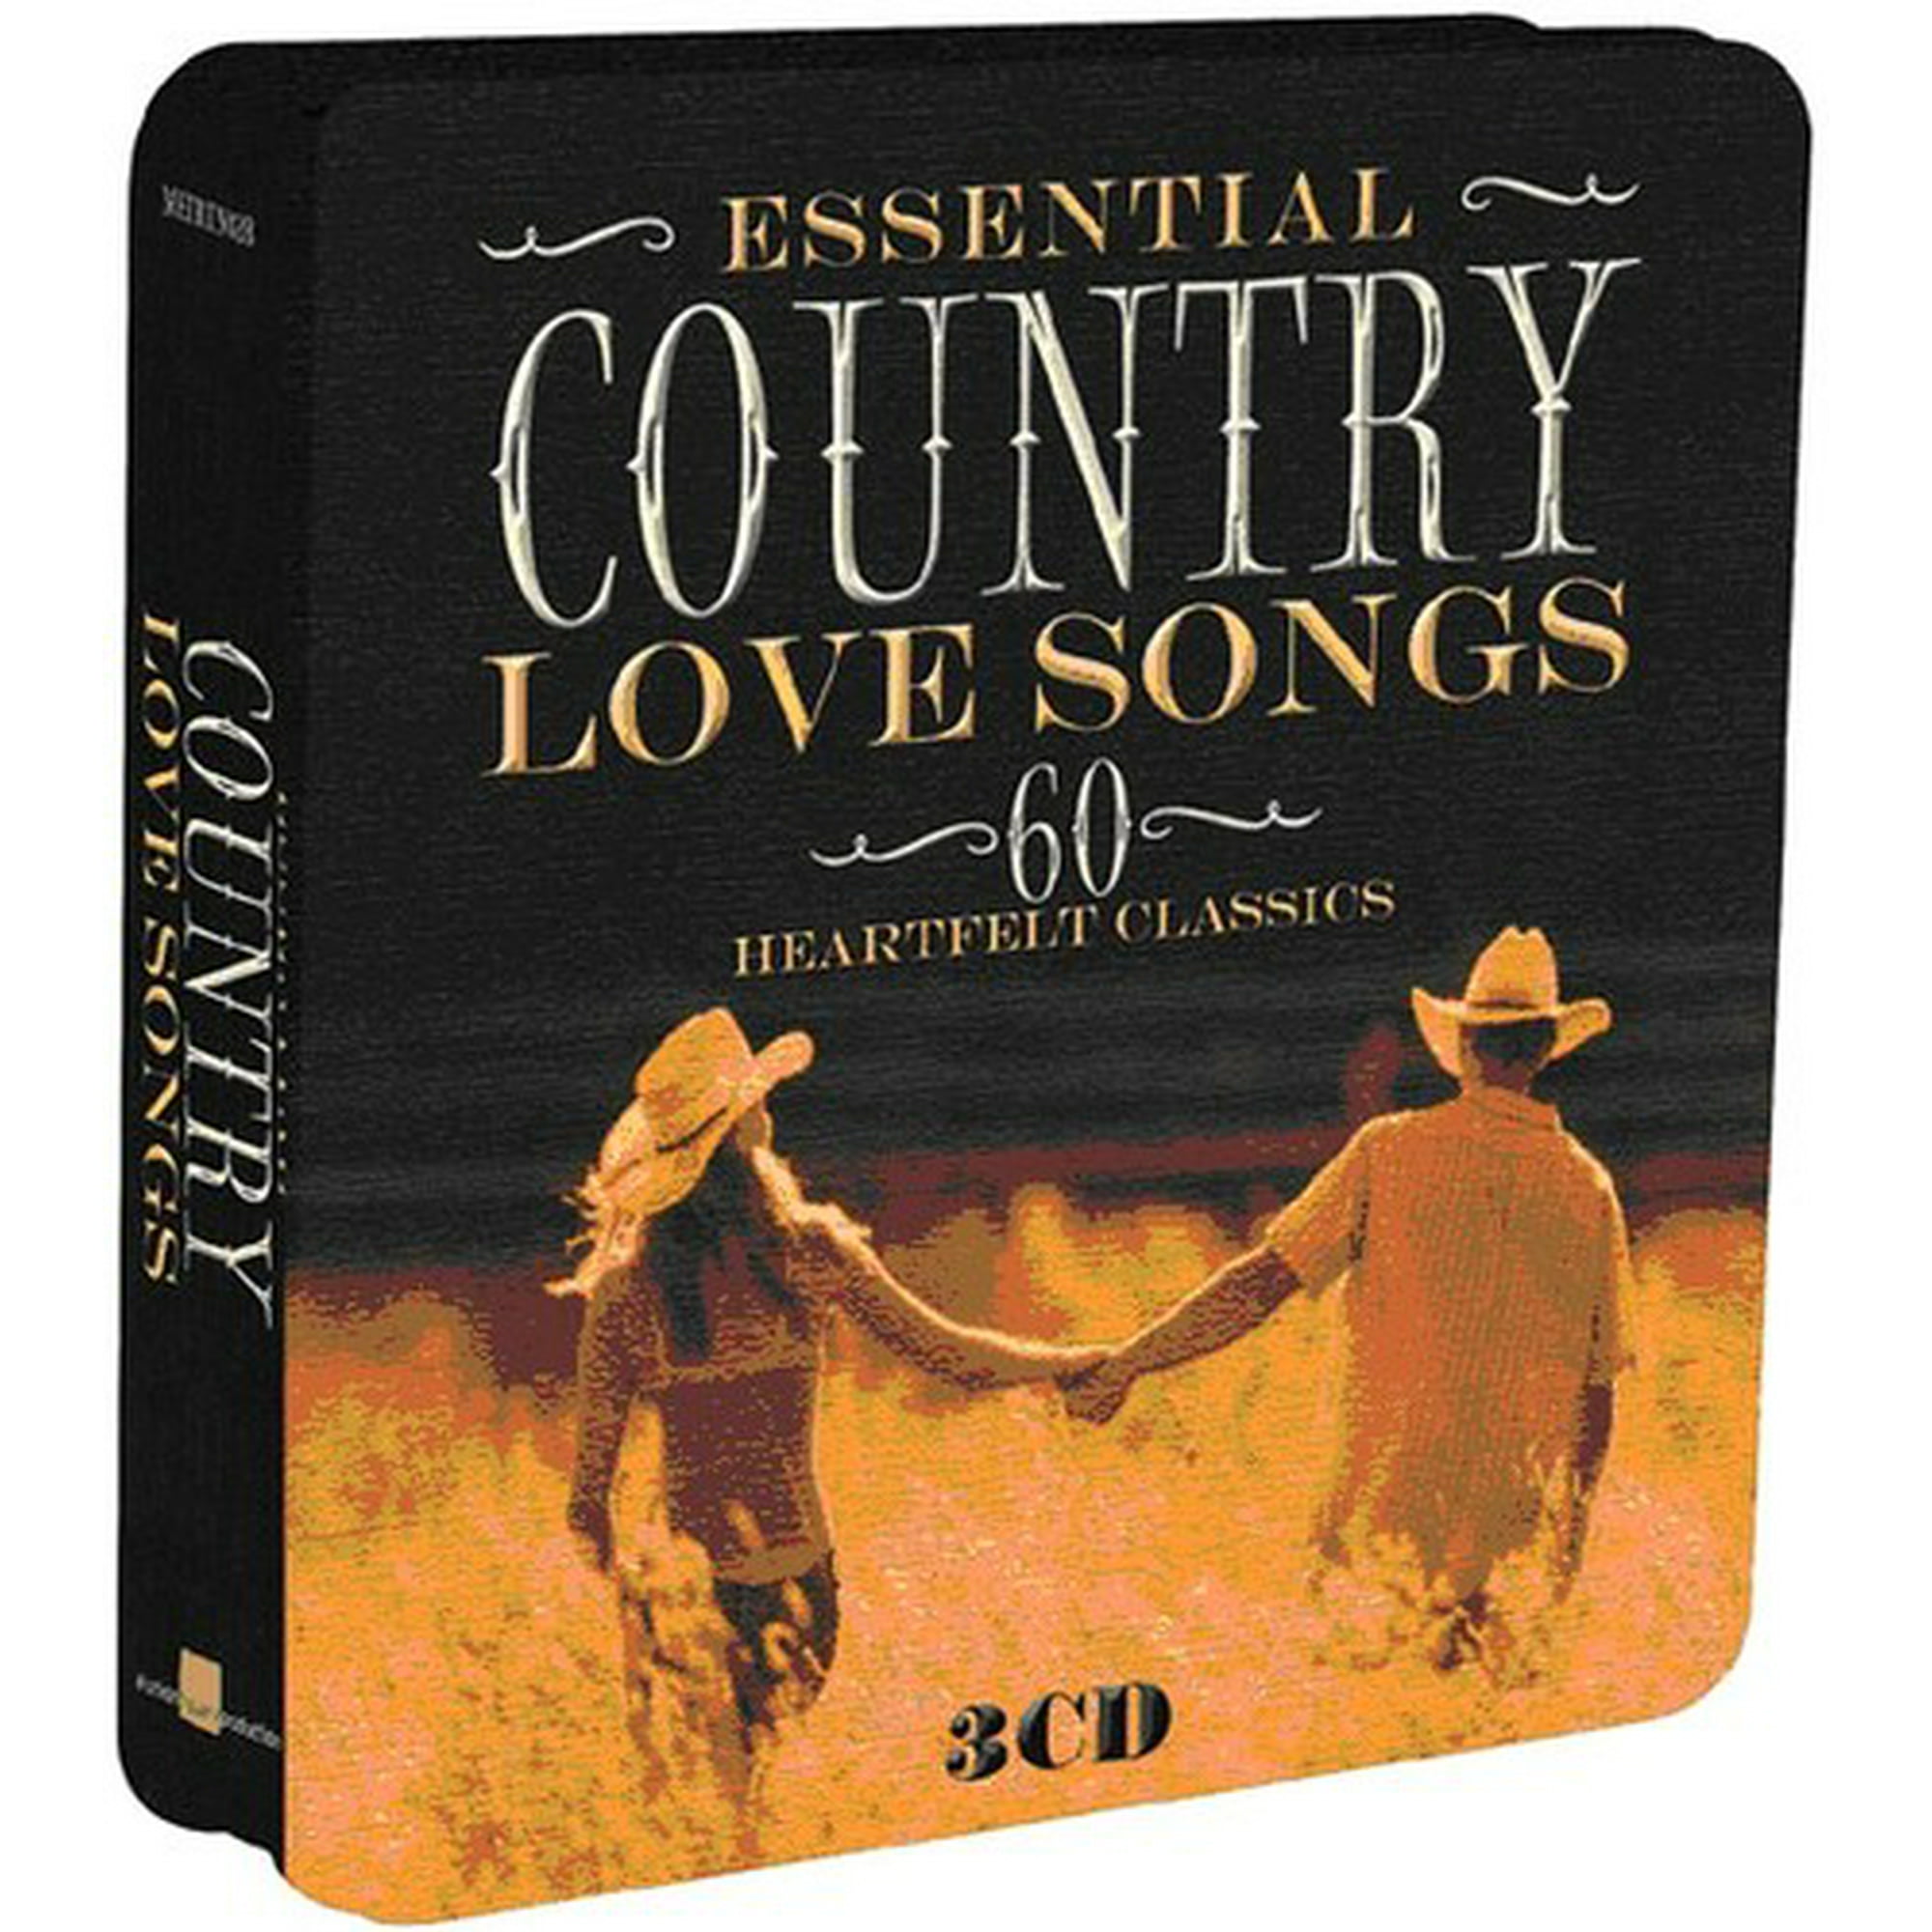 country music cd covers